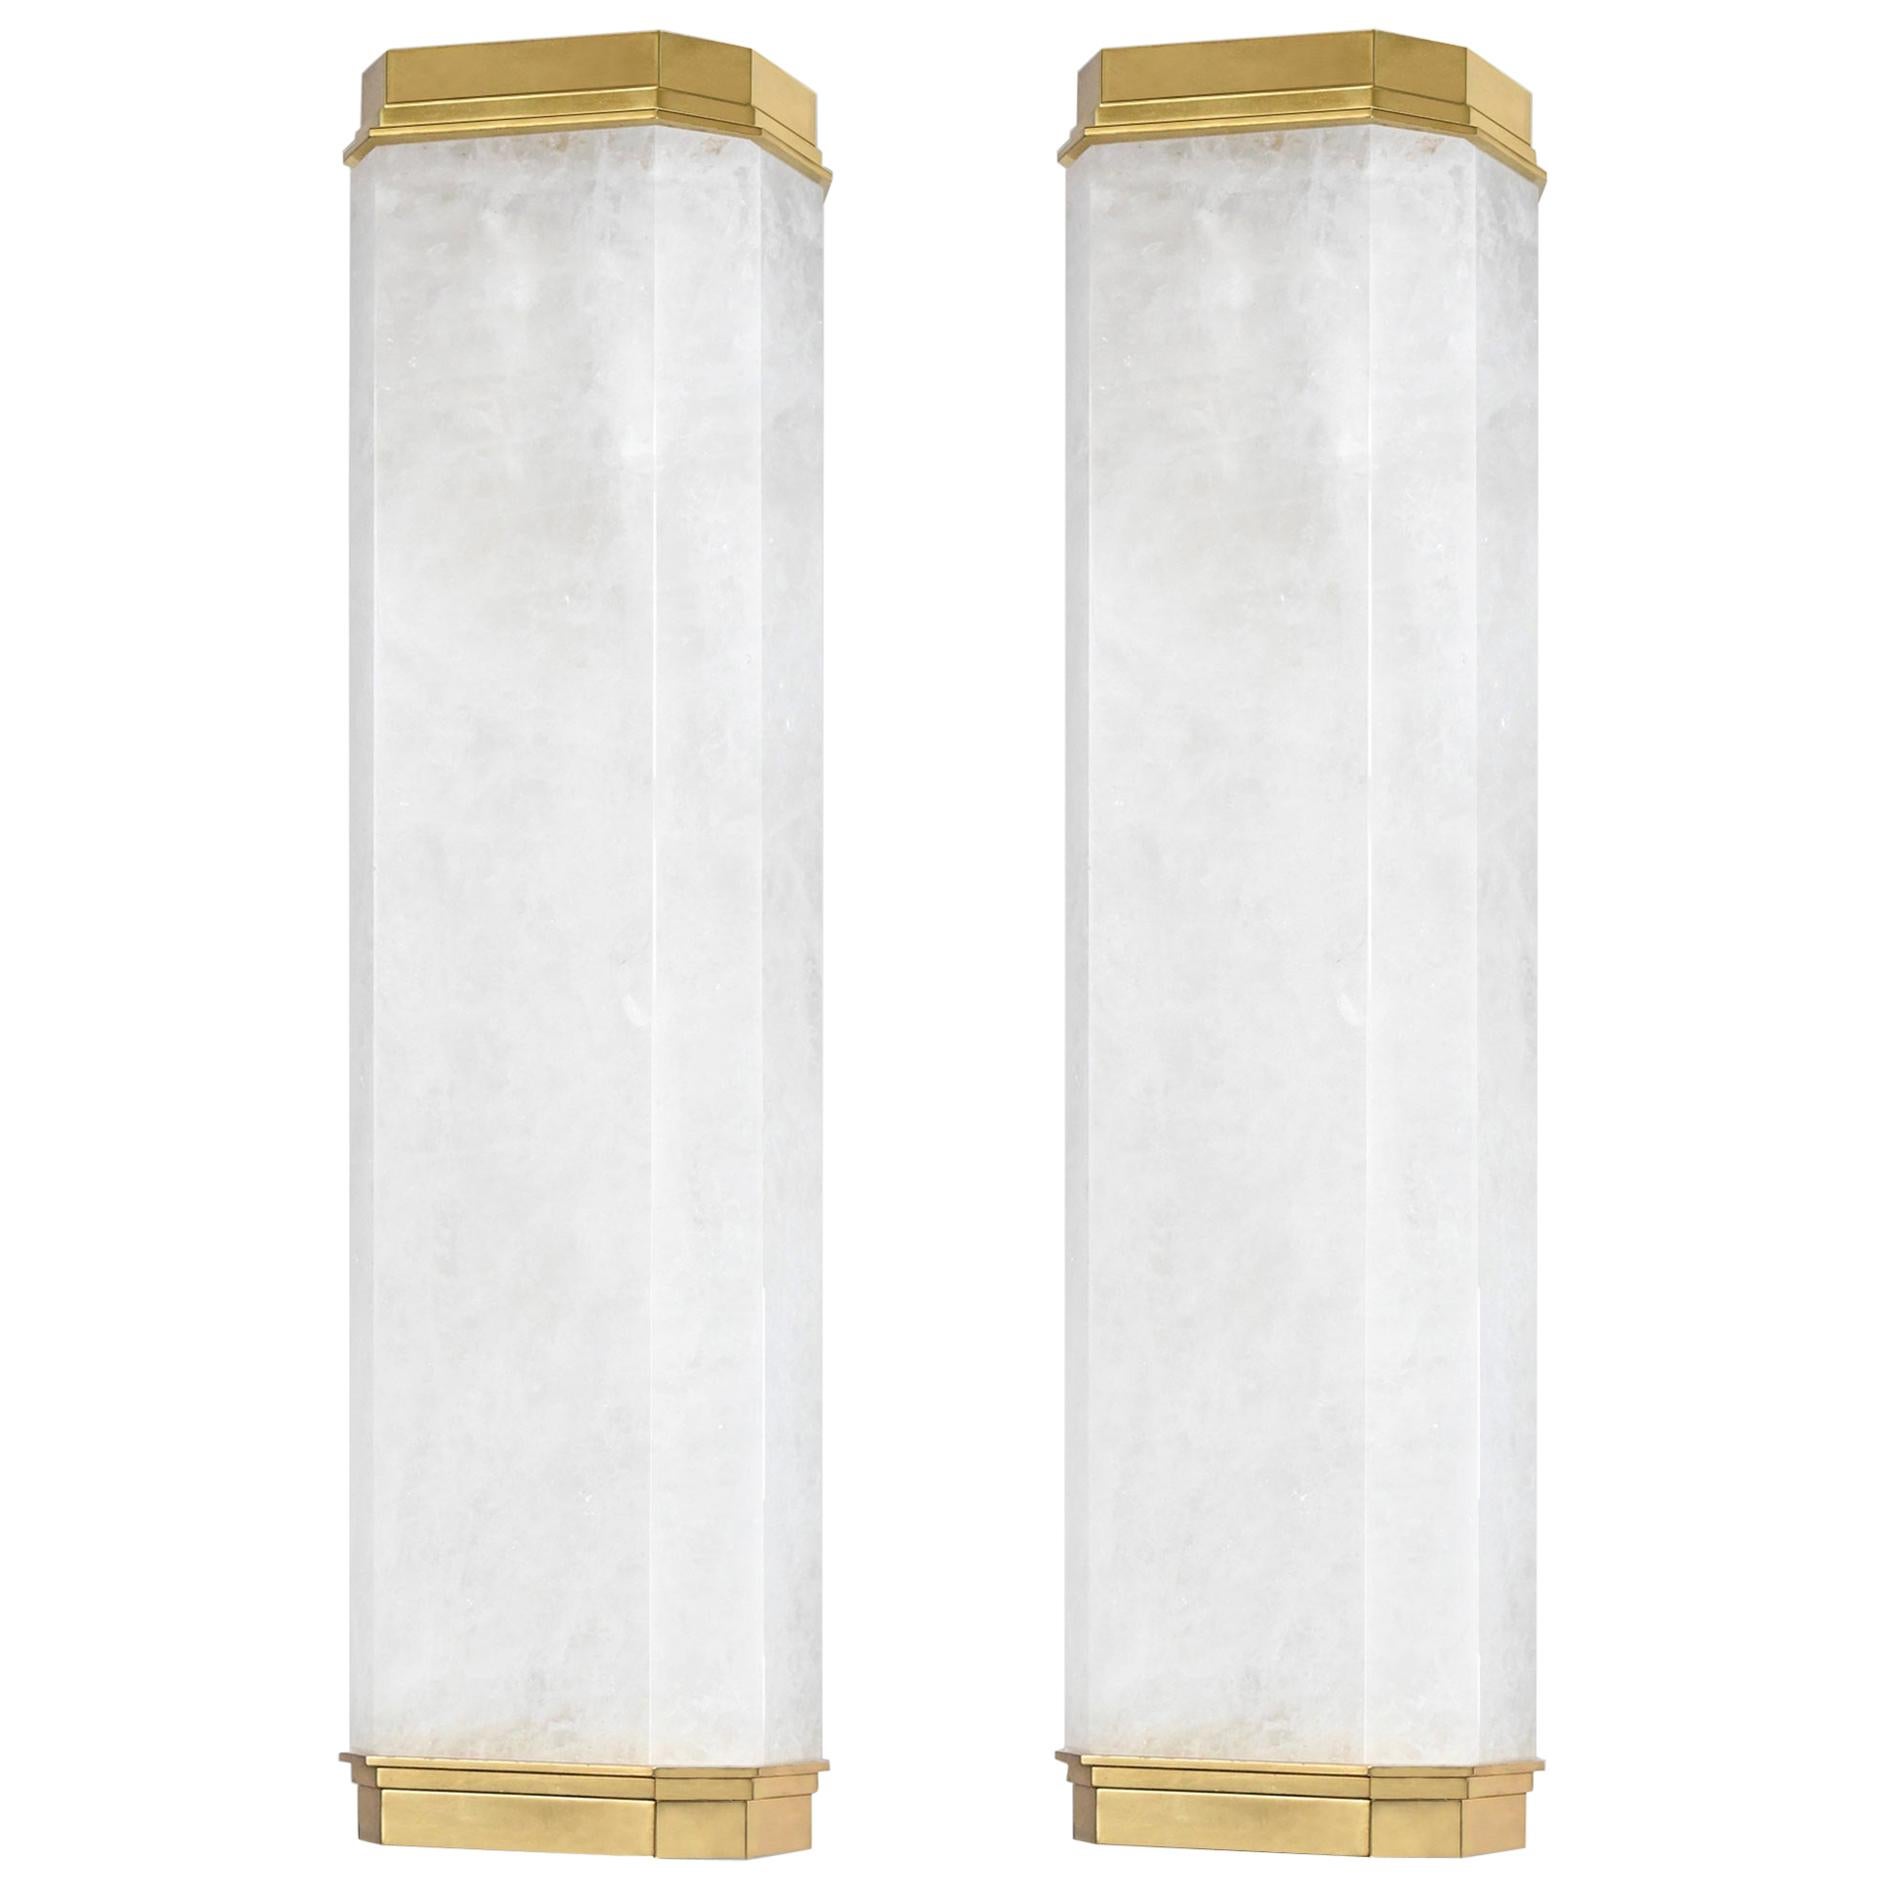 Group of four rock crystal sconces with polished brass decoration. Created by Phoenix Gallery.
Each sconce installed with two E26 sockets. Use two 80 watts long tube LED warm light lightbulbs. 160w total.
  